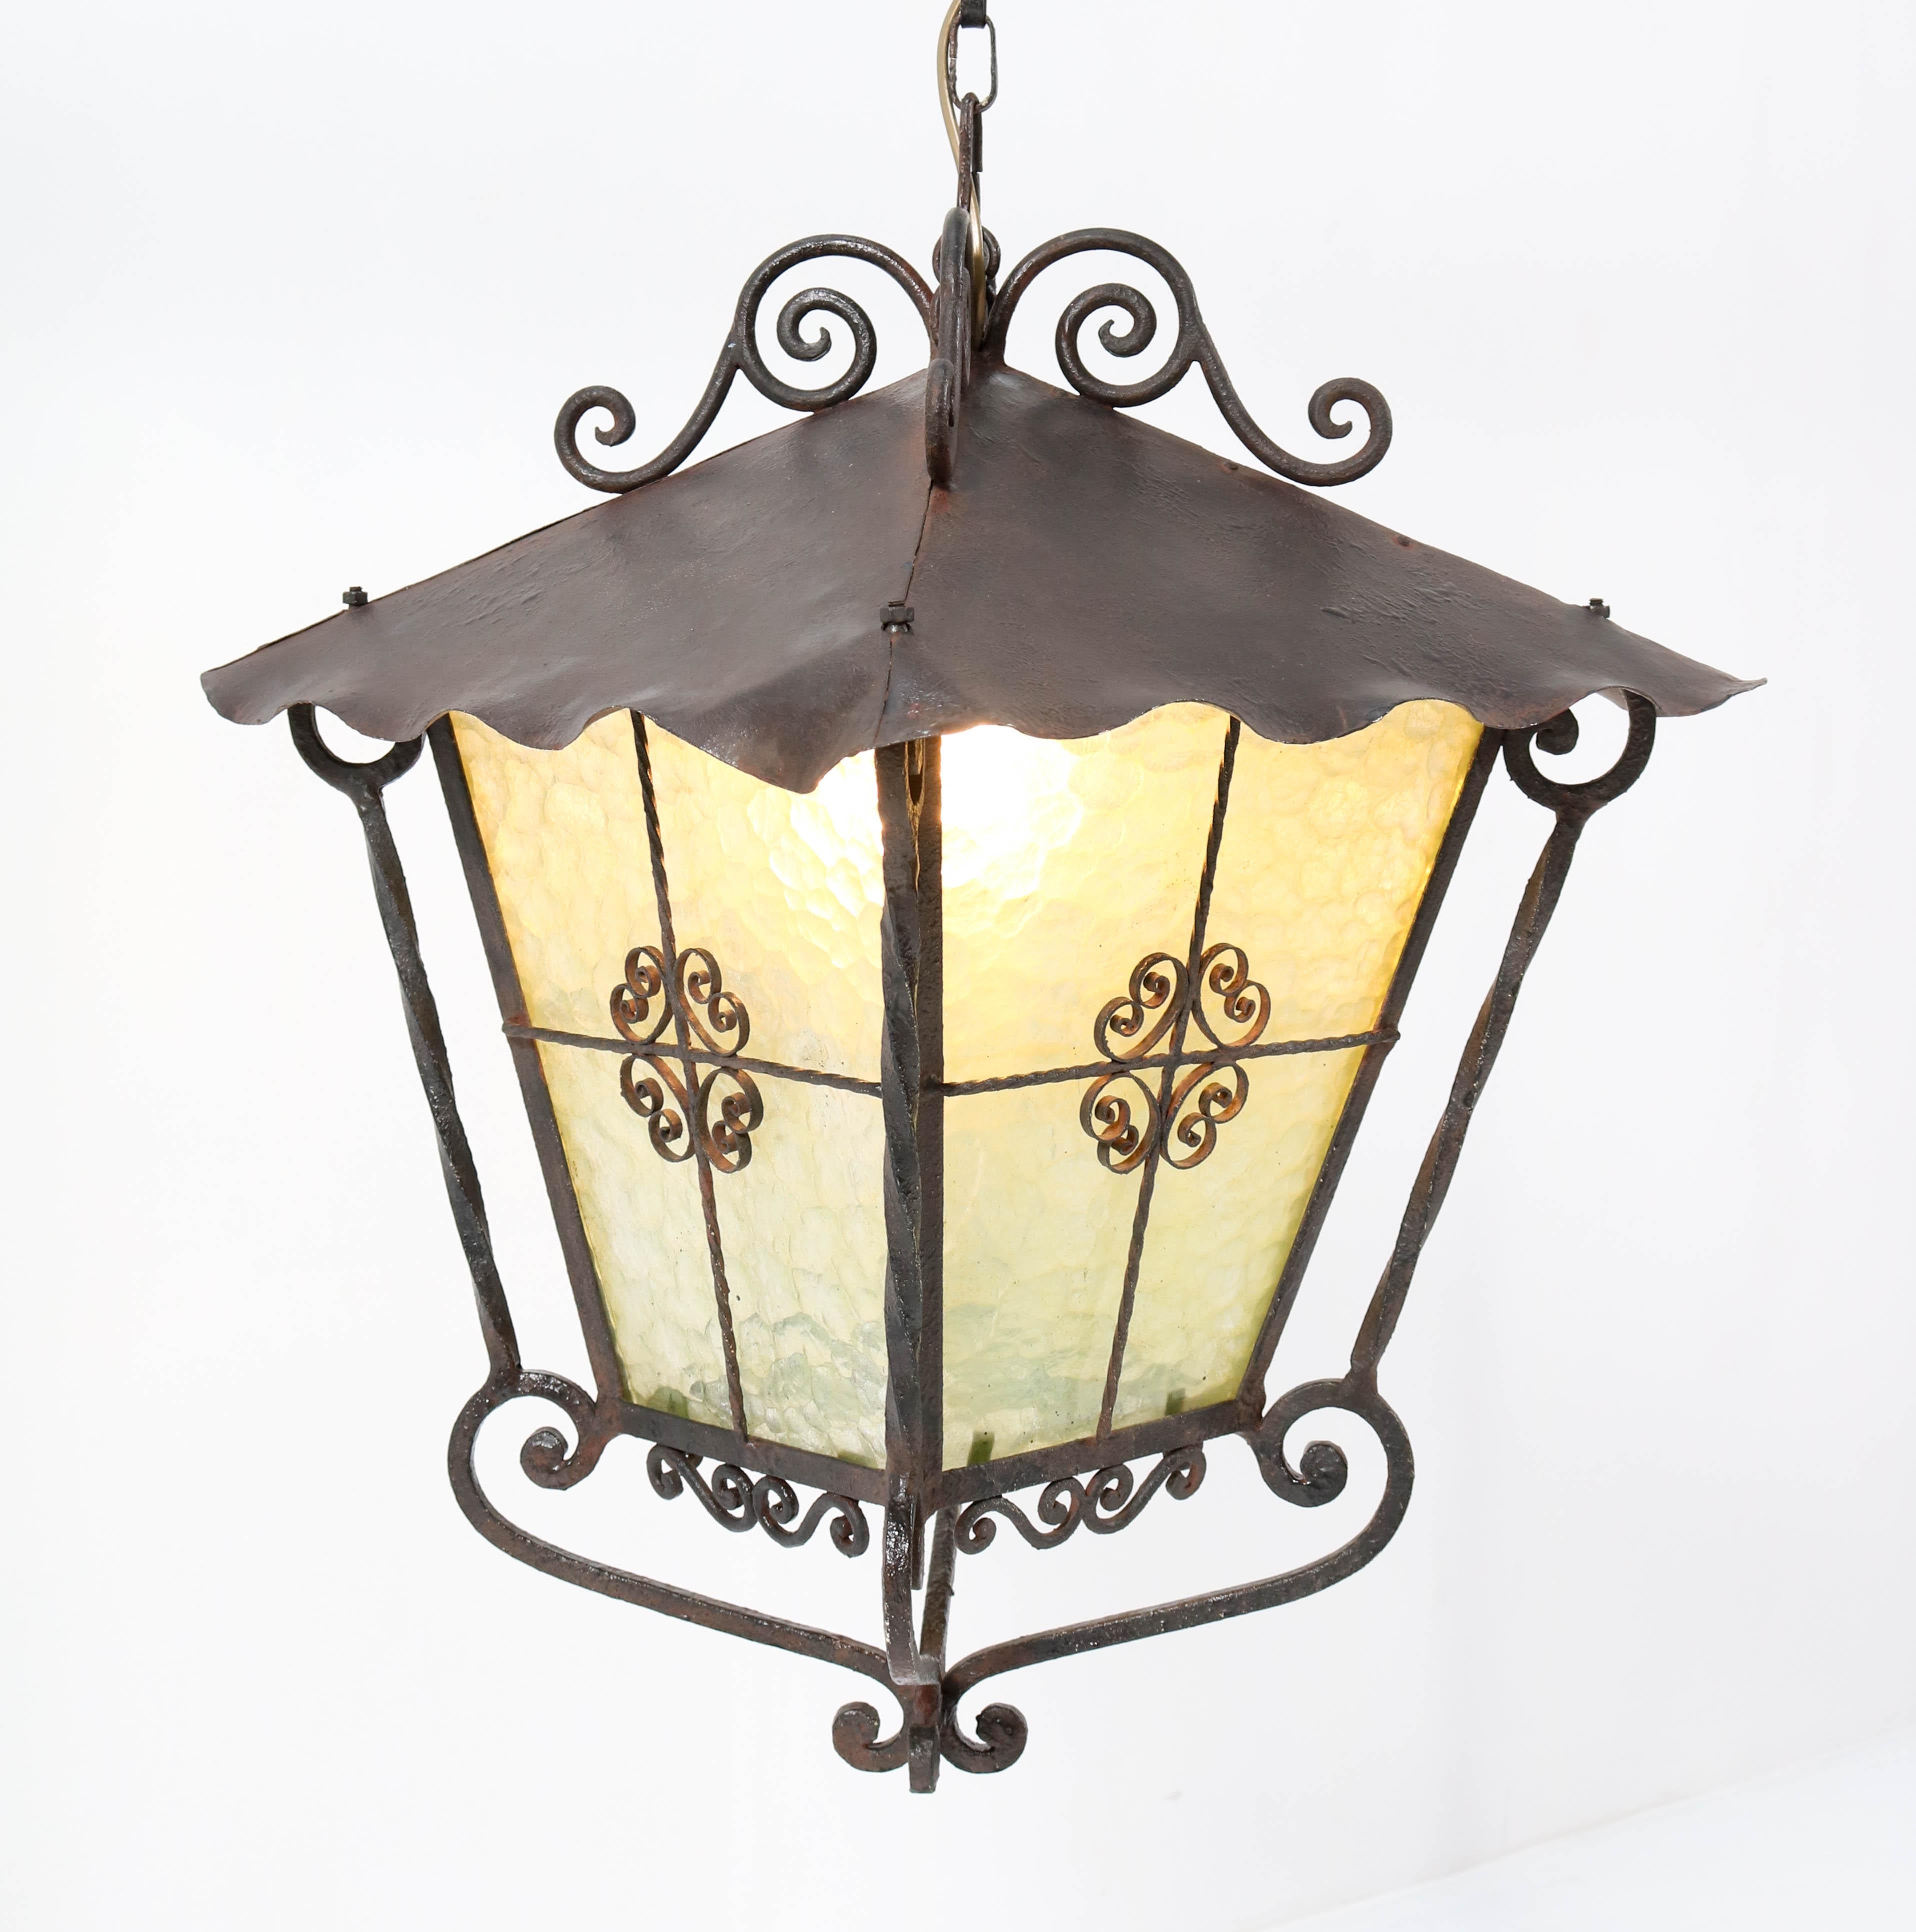 Glass Large French Provincial Wrought Iron Lantern, 1950s For Sale